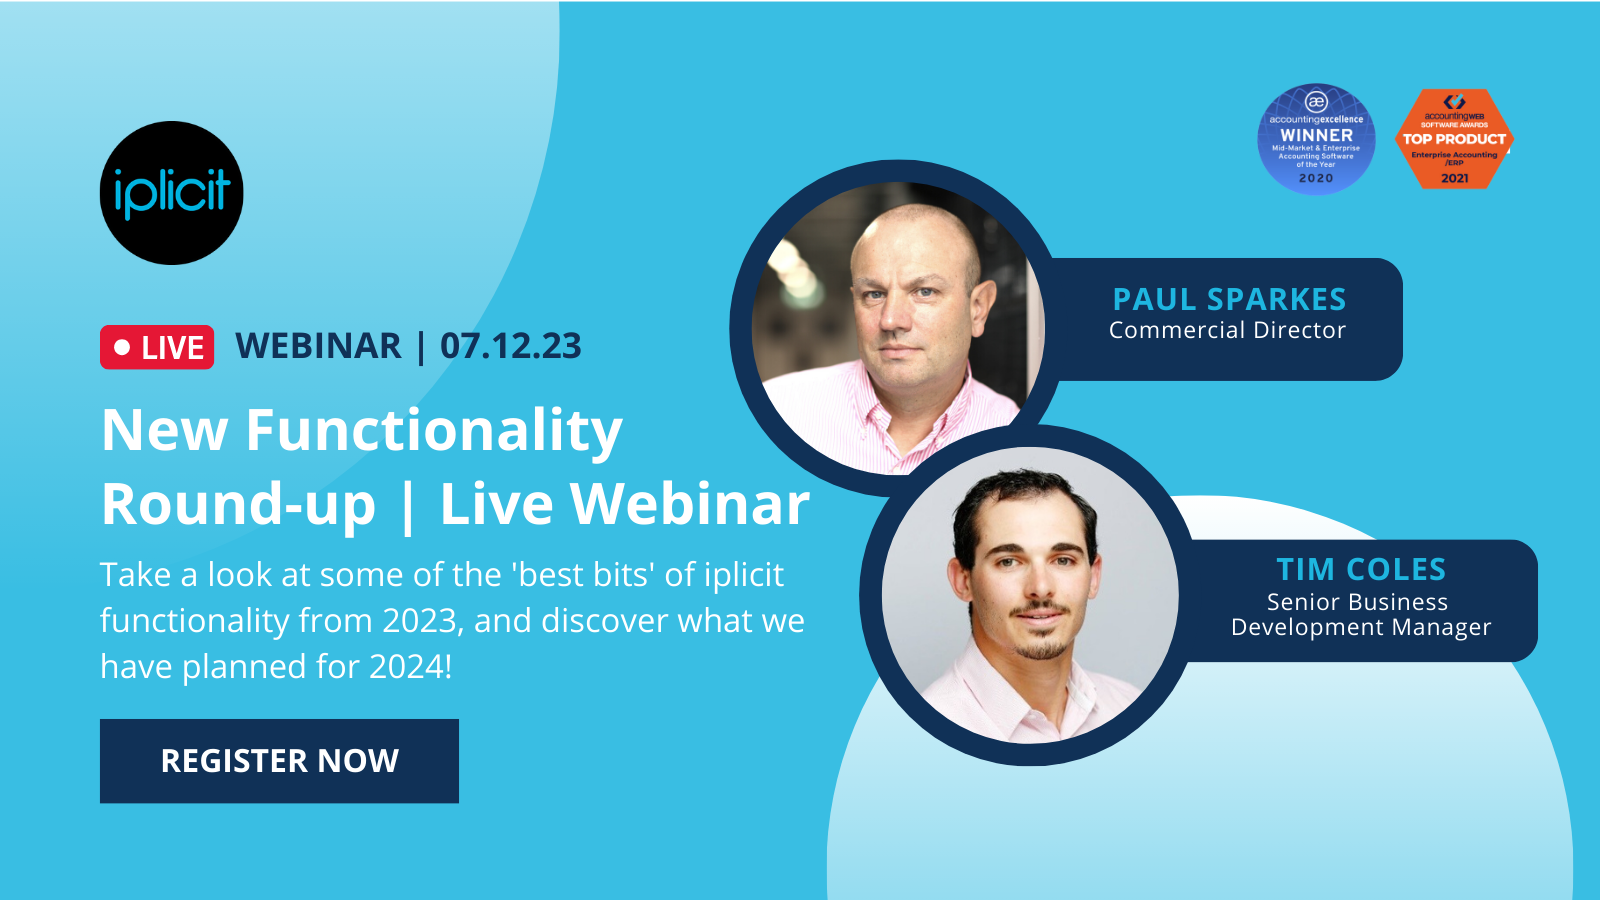 New Functionality Round-up webinar with iplicit: logo